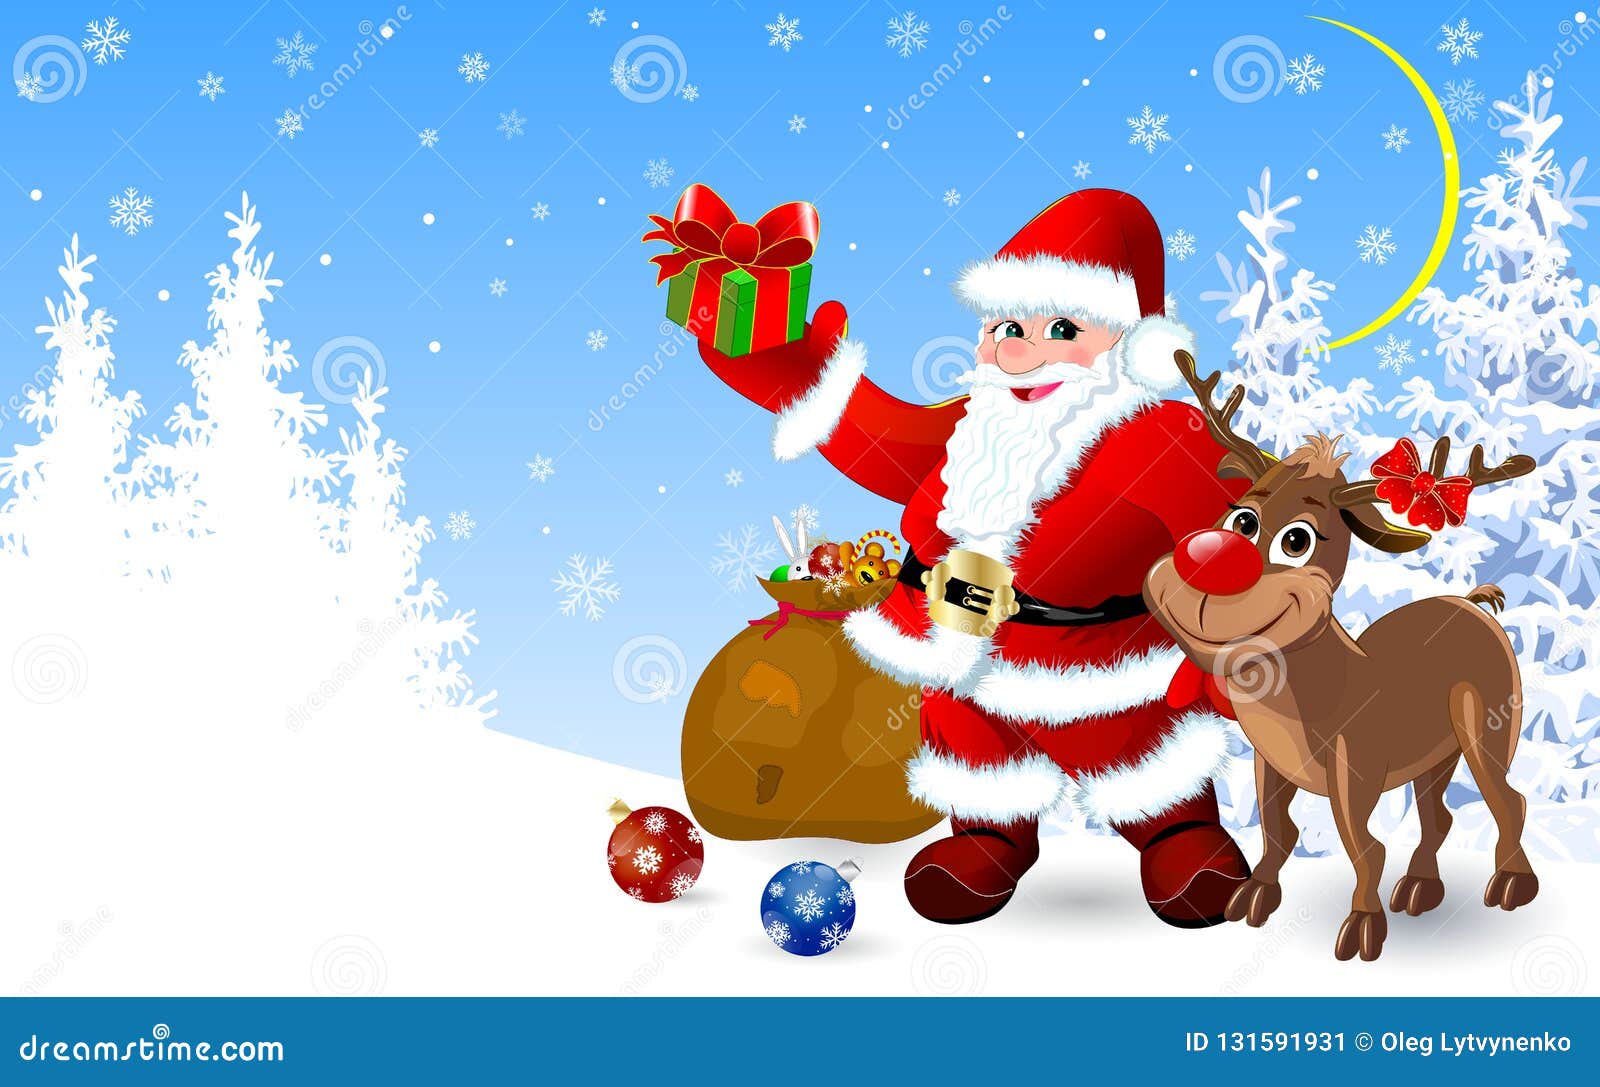 Santa and Deer with Gifts for Christmas Stock Vector - Illustration of ...